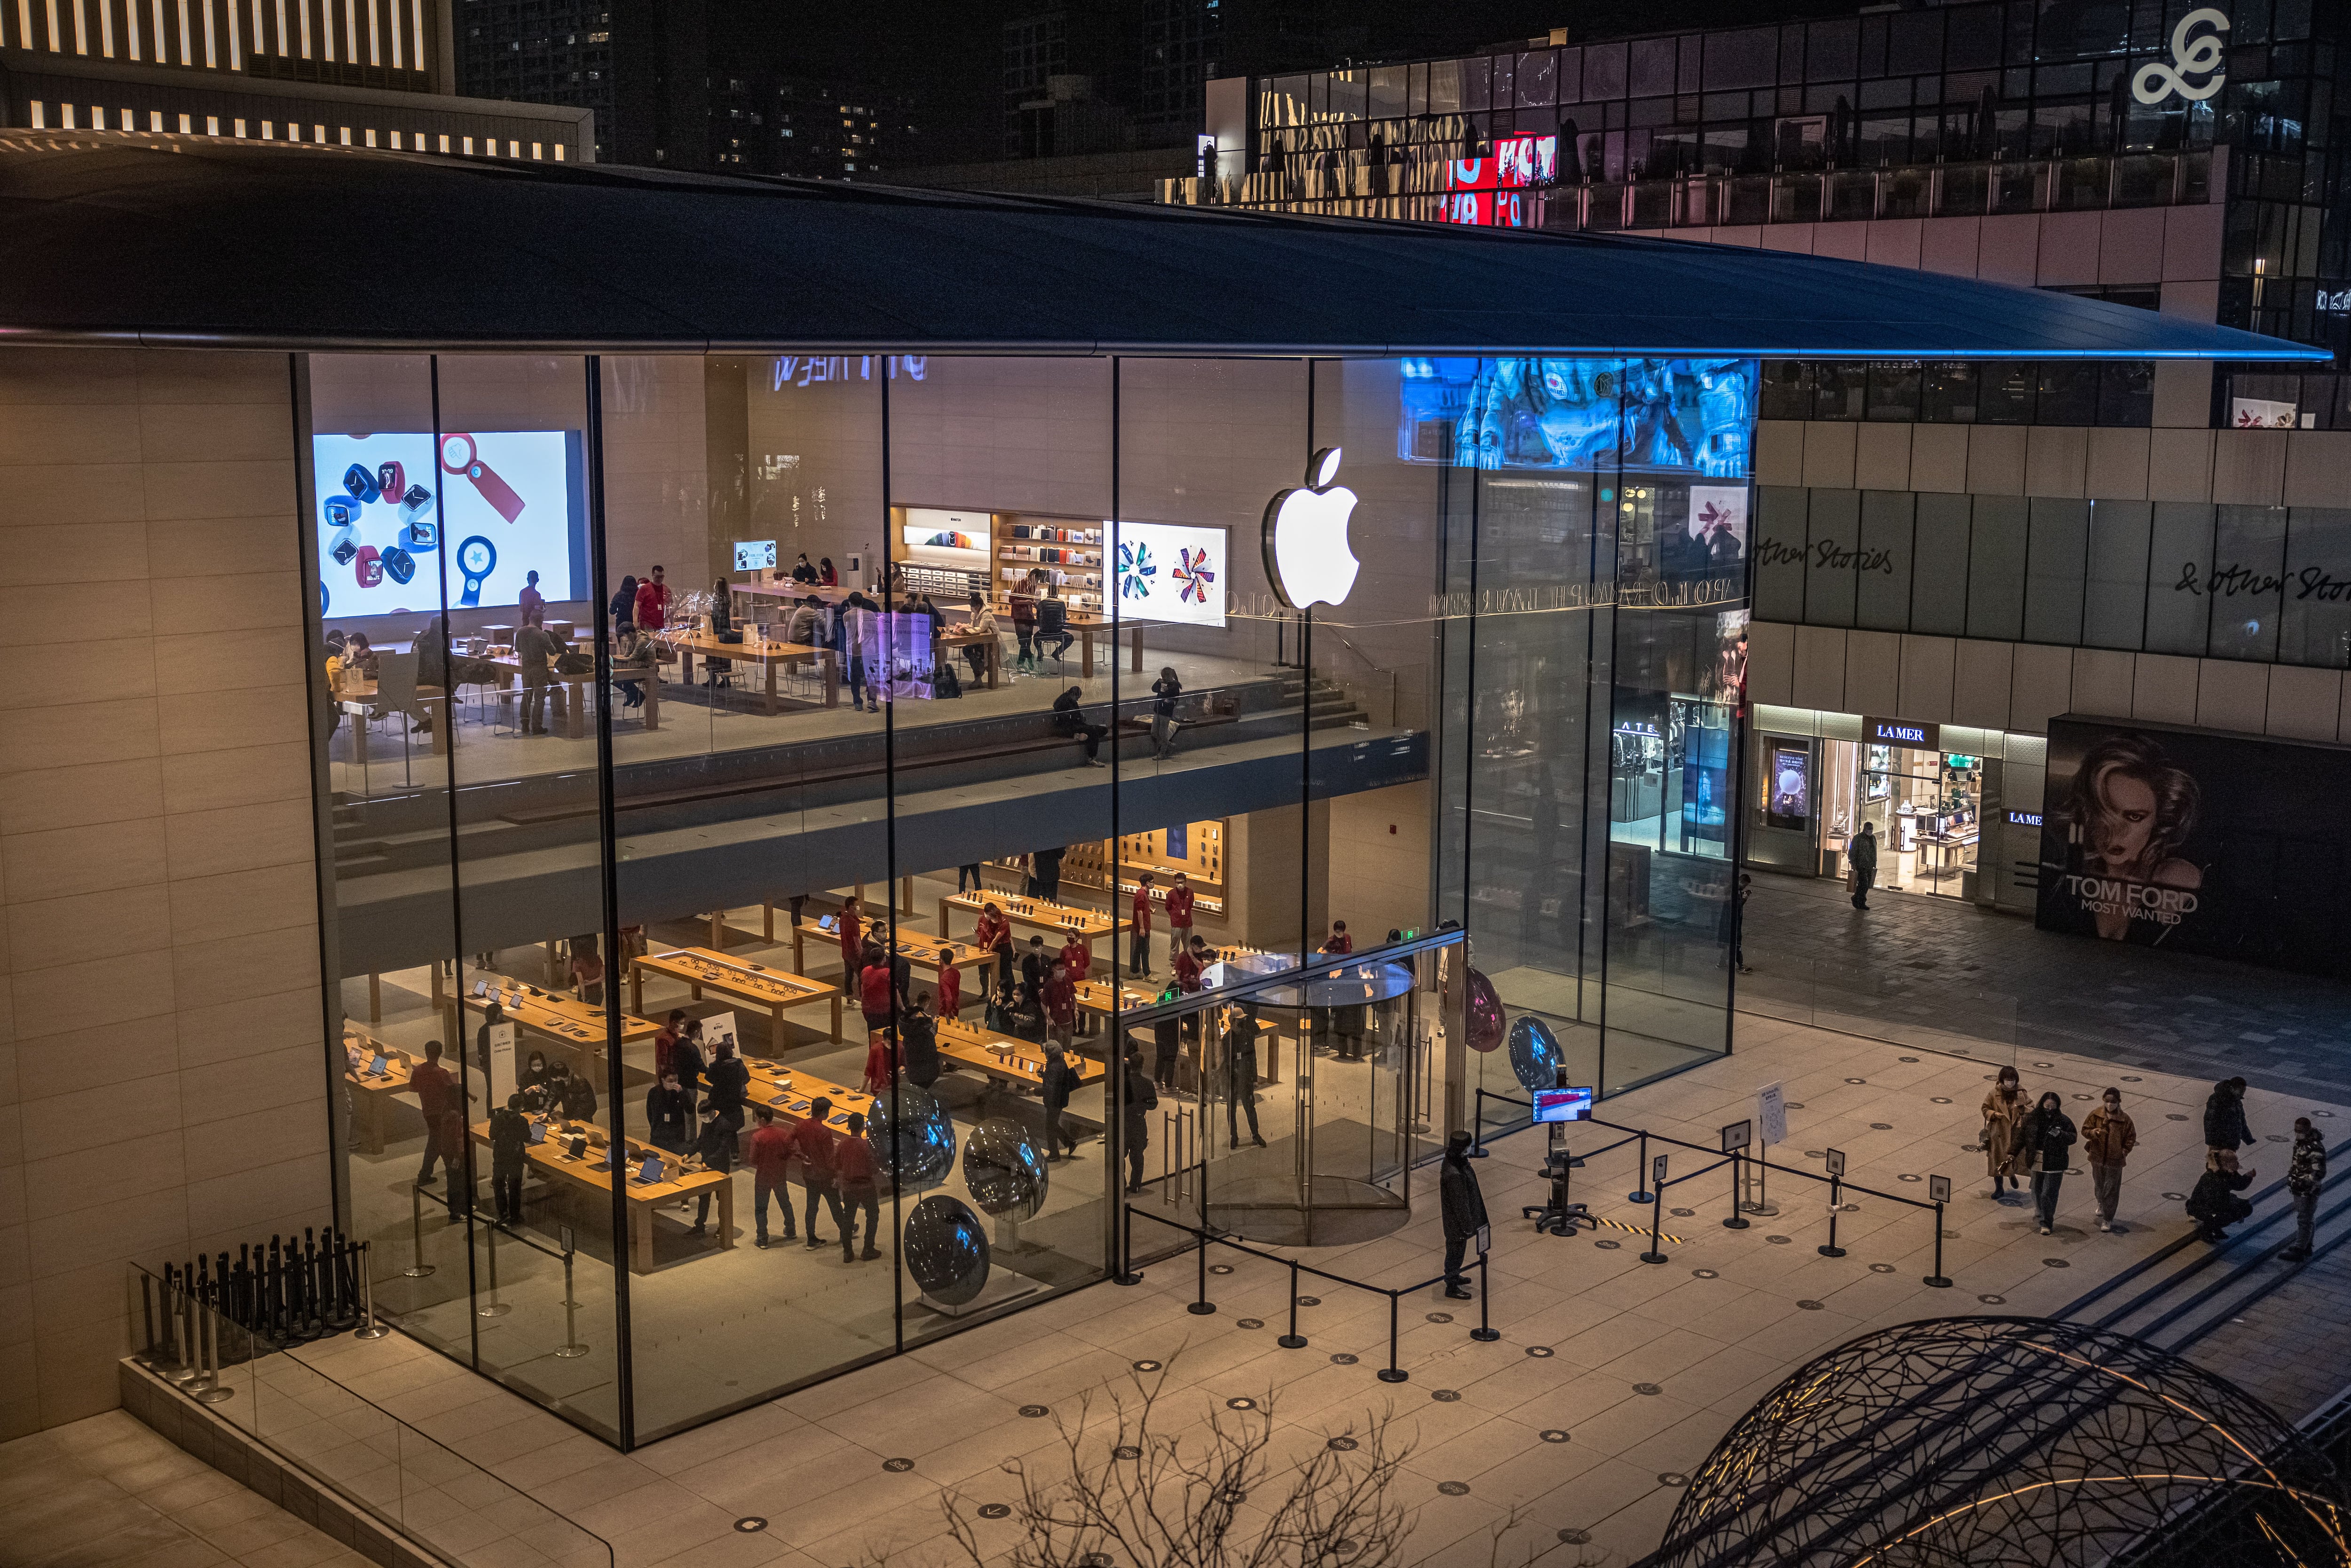 Tata Group to open 100 exclusive Apple stores: Report